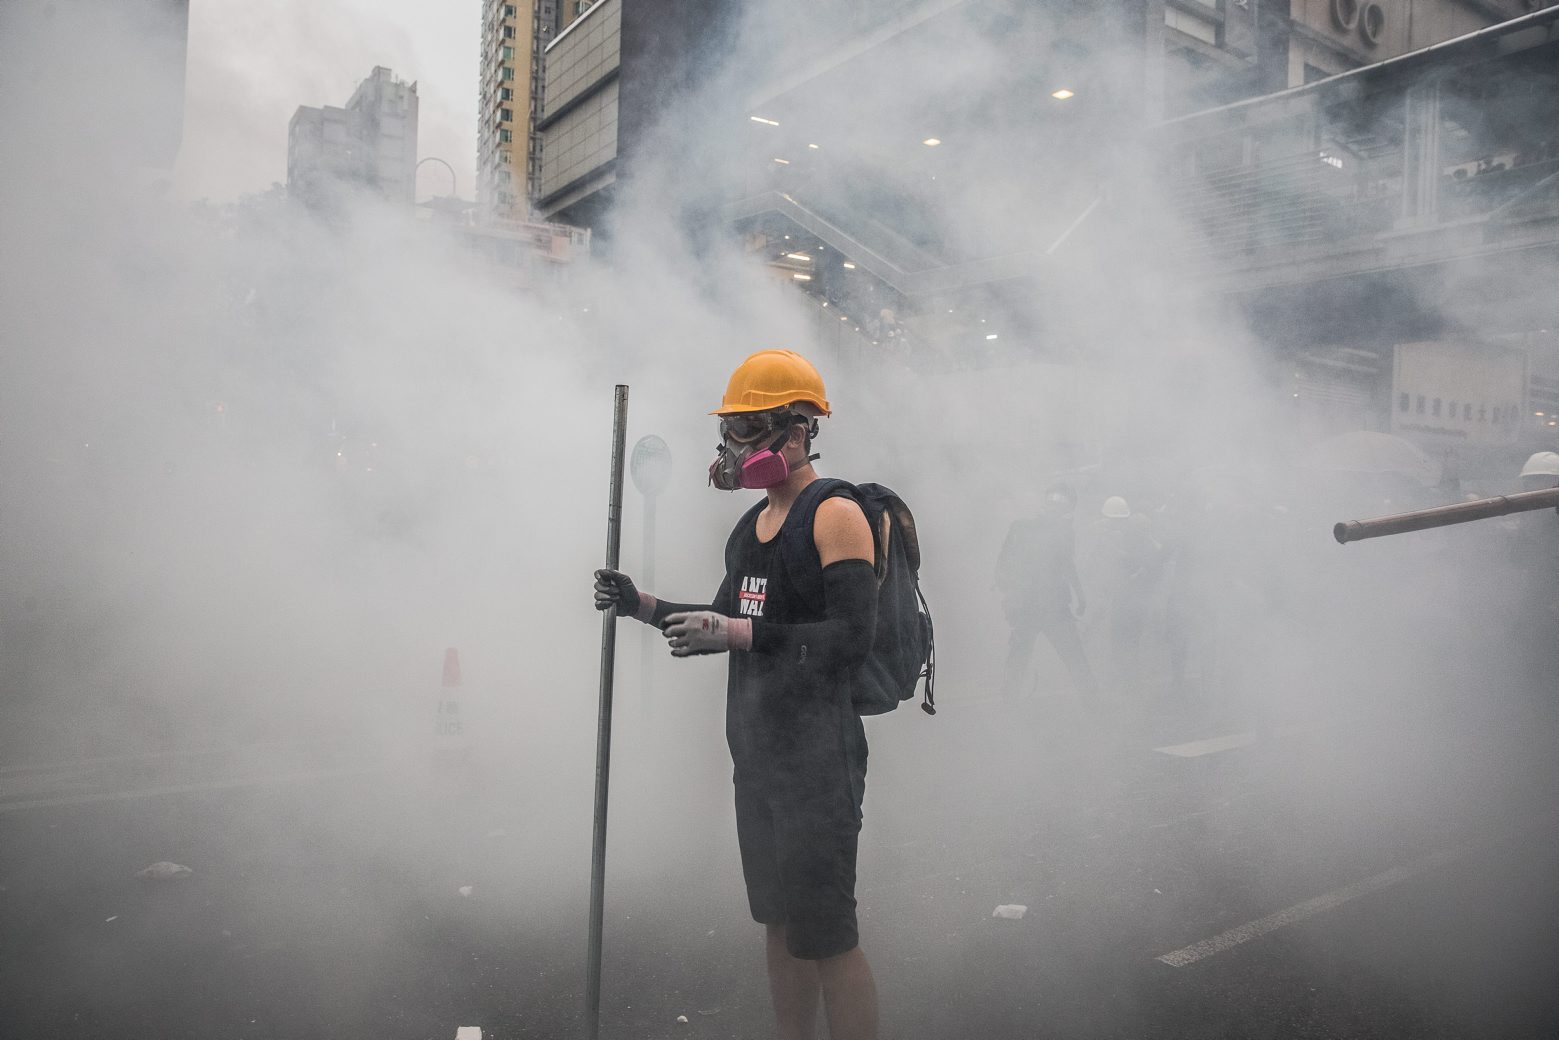 epa07793171 A protester wearing a gas mask stands in a tear gas smoke fired by the police during an anti-government rally in Tsuen Wan, in Hong Kong, China, 25 August 2019. The protests were triggered by an extradition bill to China in June, now suspended, and evolved into a wider anti-government movement with no end in sight.  EPA/ROMAN PILIPEY CHINA HONG KONG PROTESTS